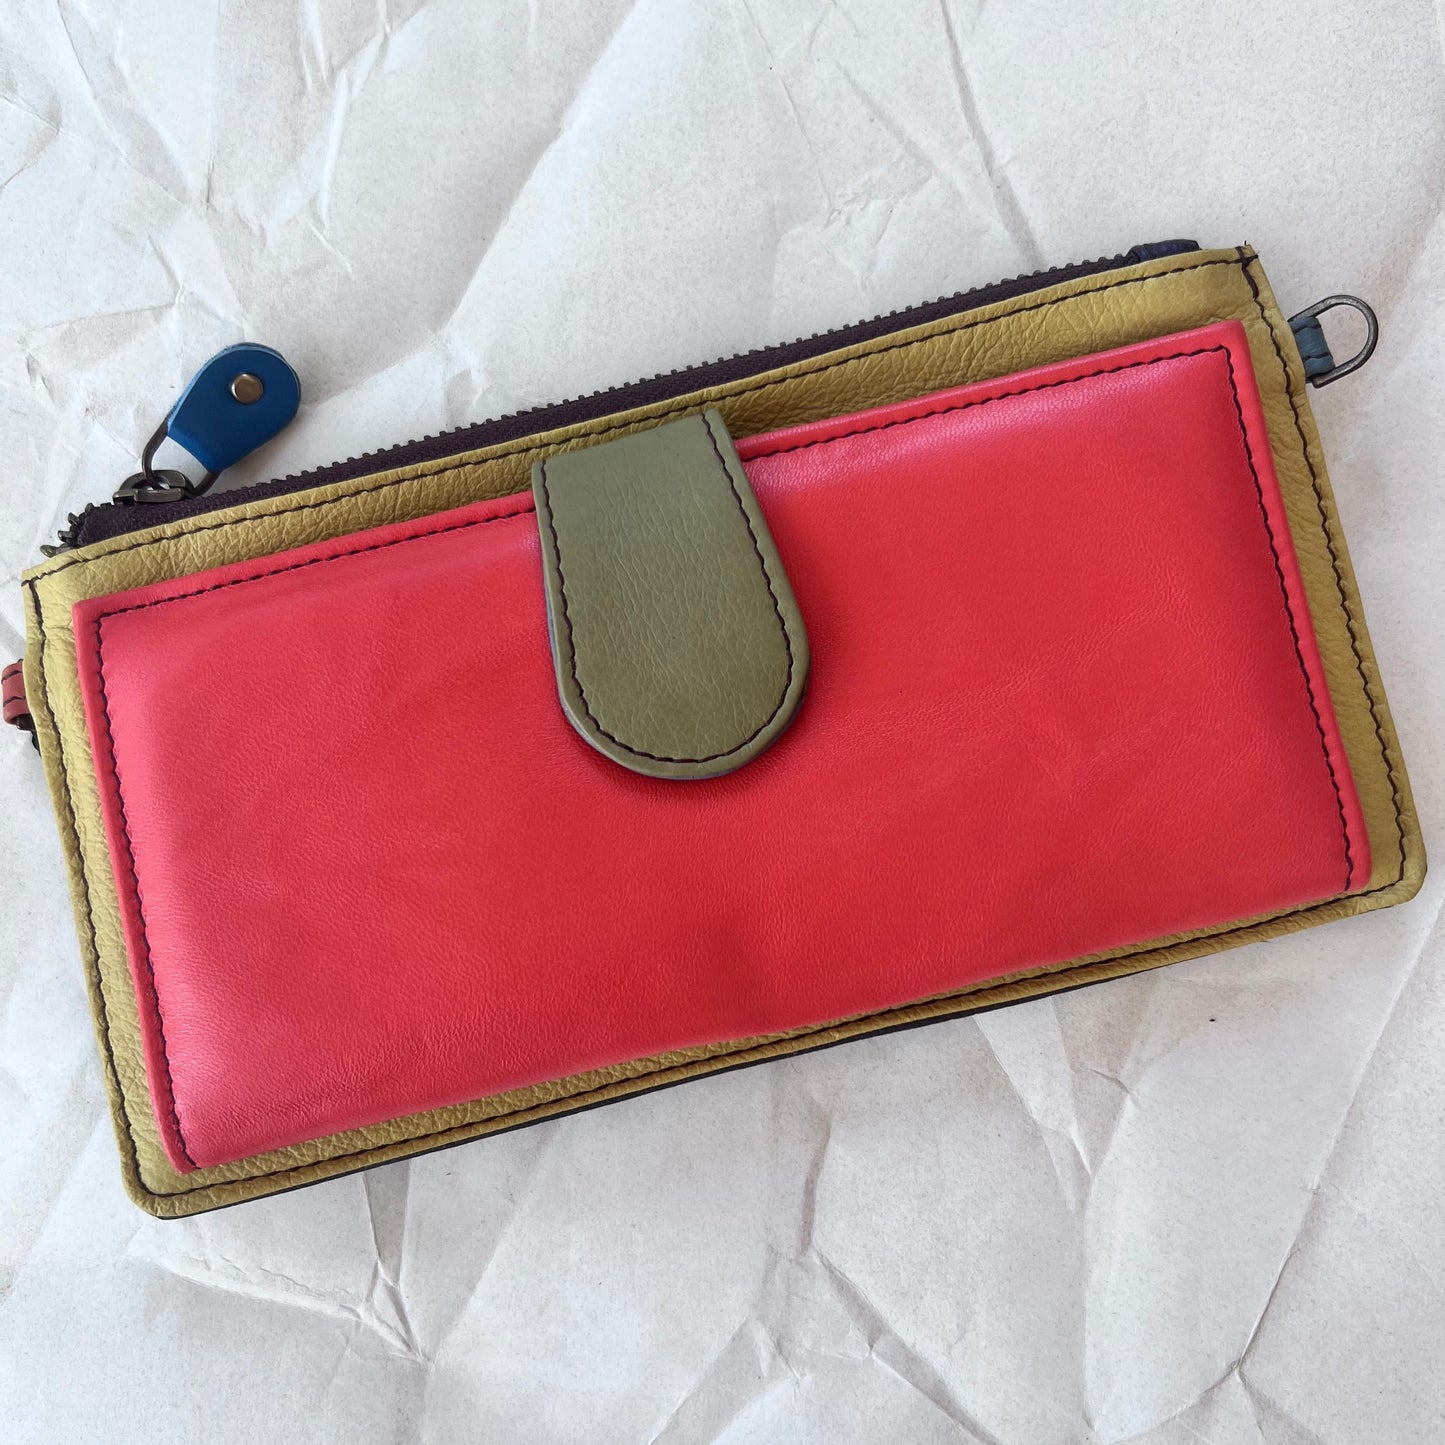 rectanglar yellow wallet with orange pocket and green tab closure.